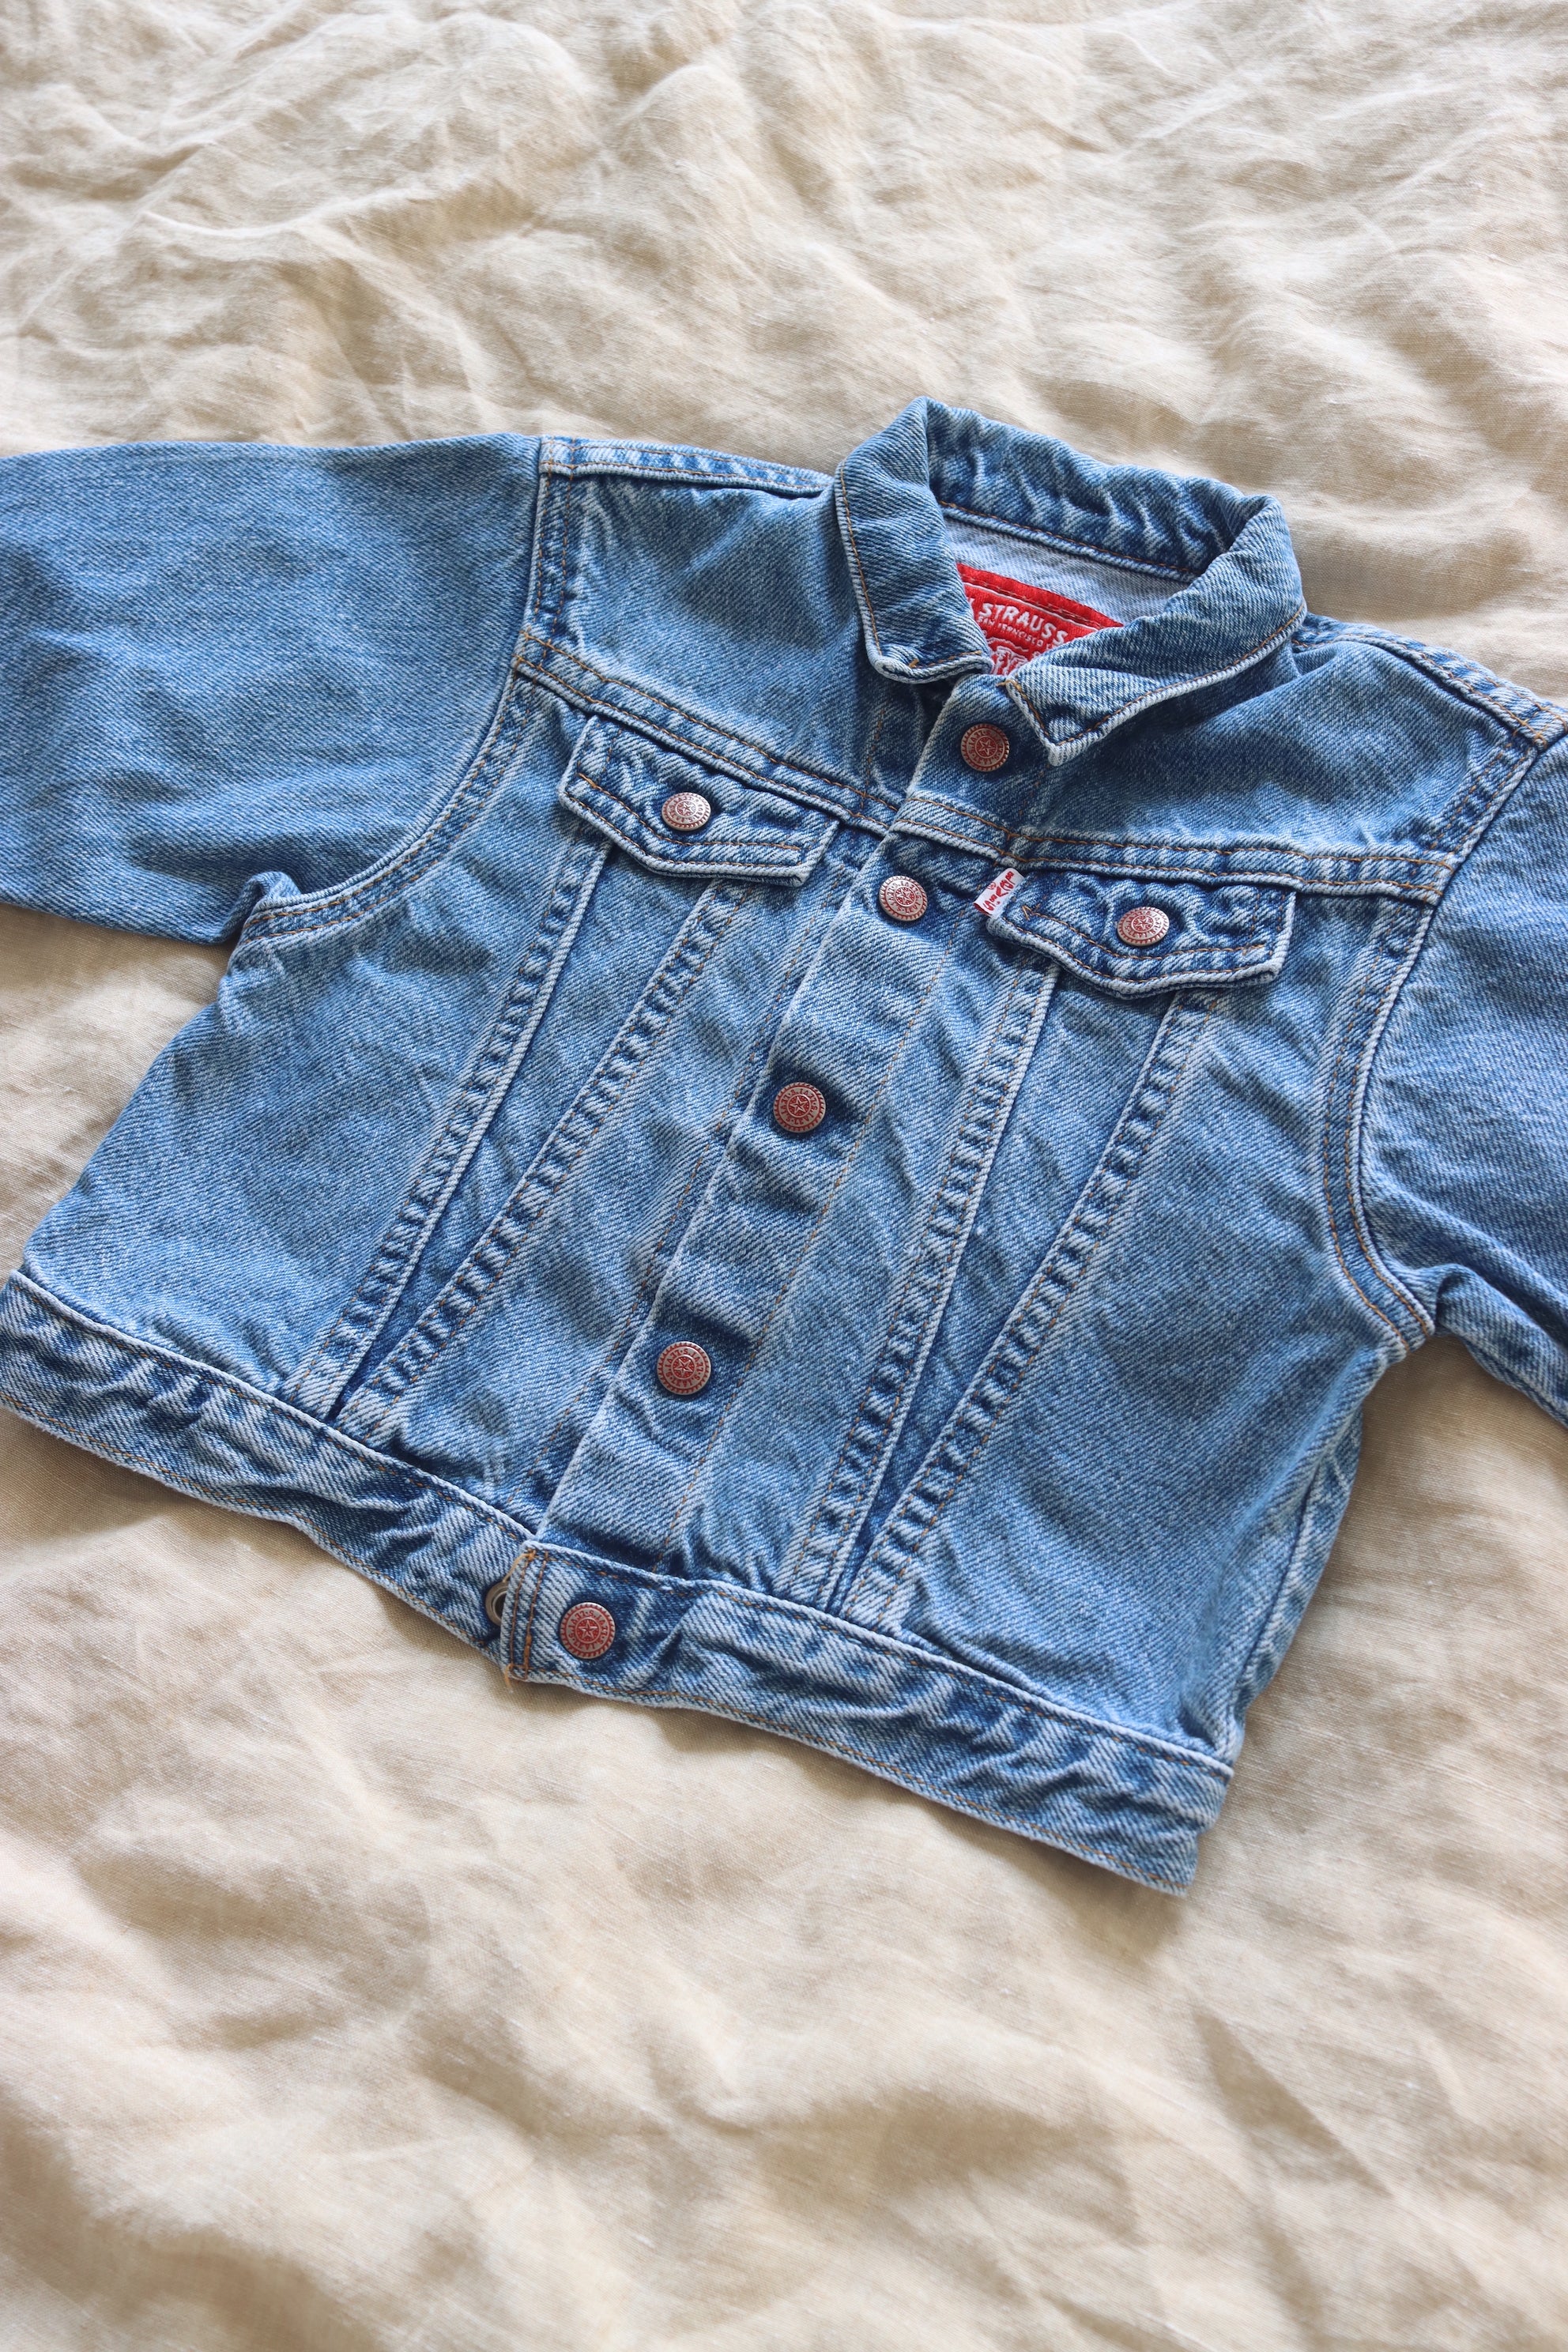 Vintage Levi's trucker jacket - size 12-24 months - made in USA